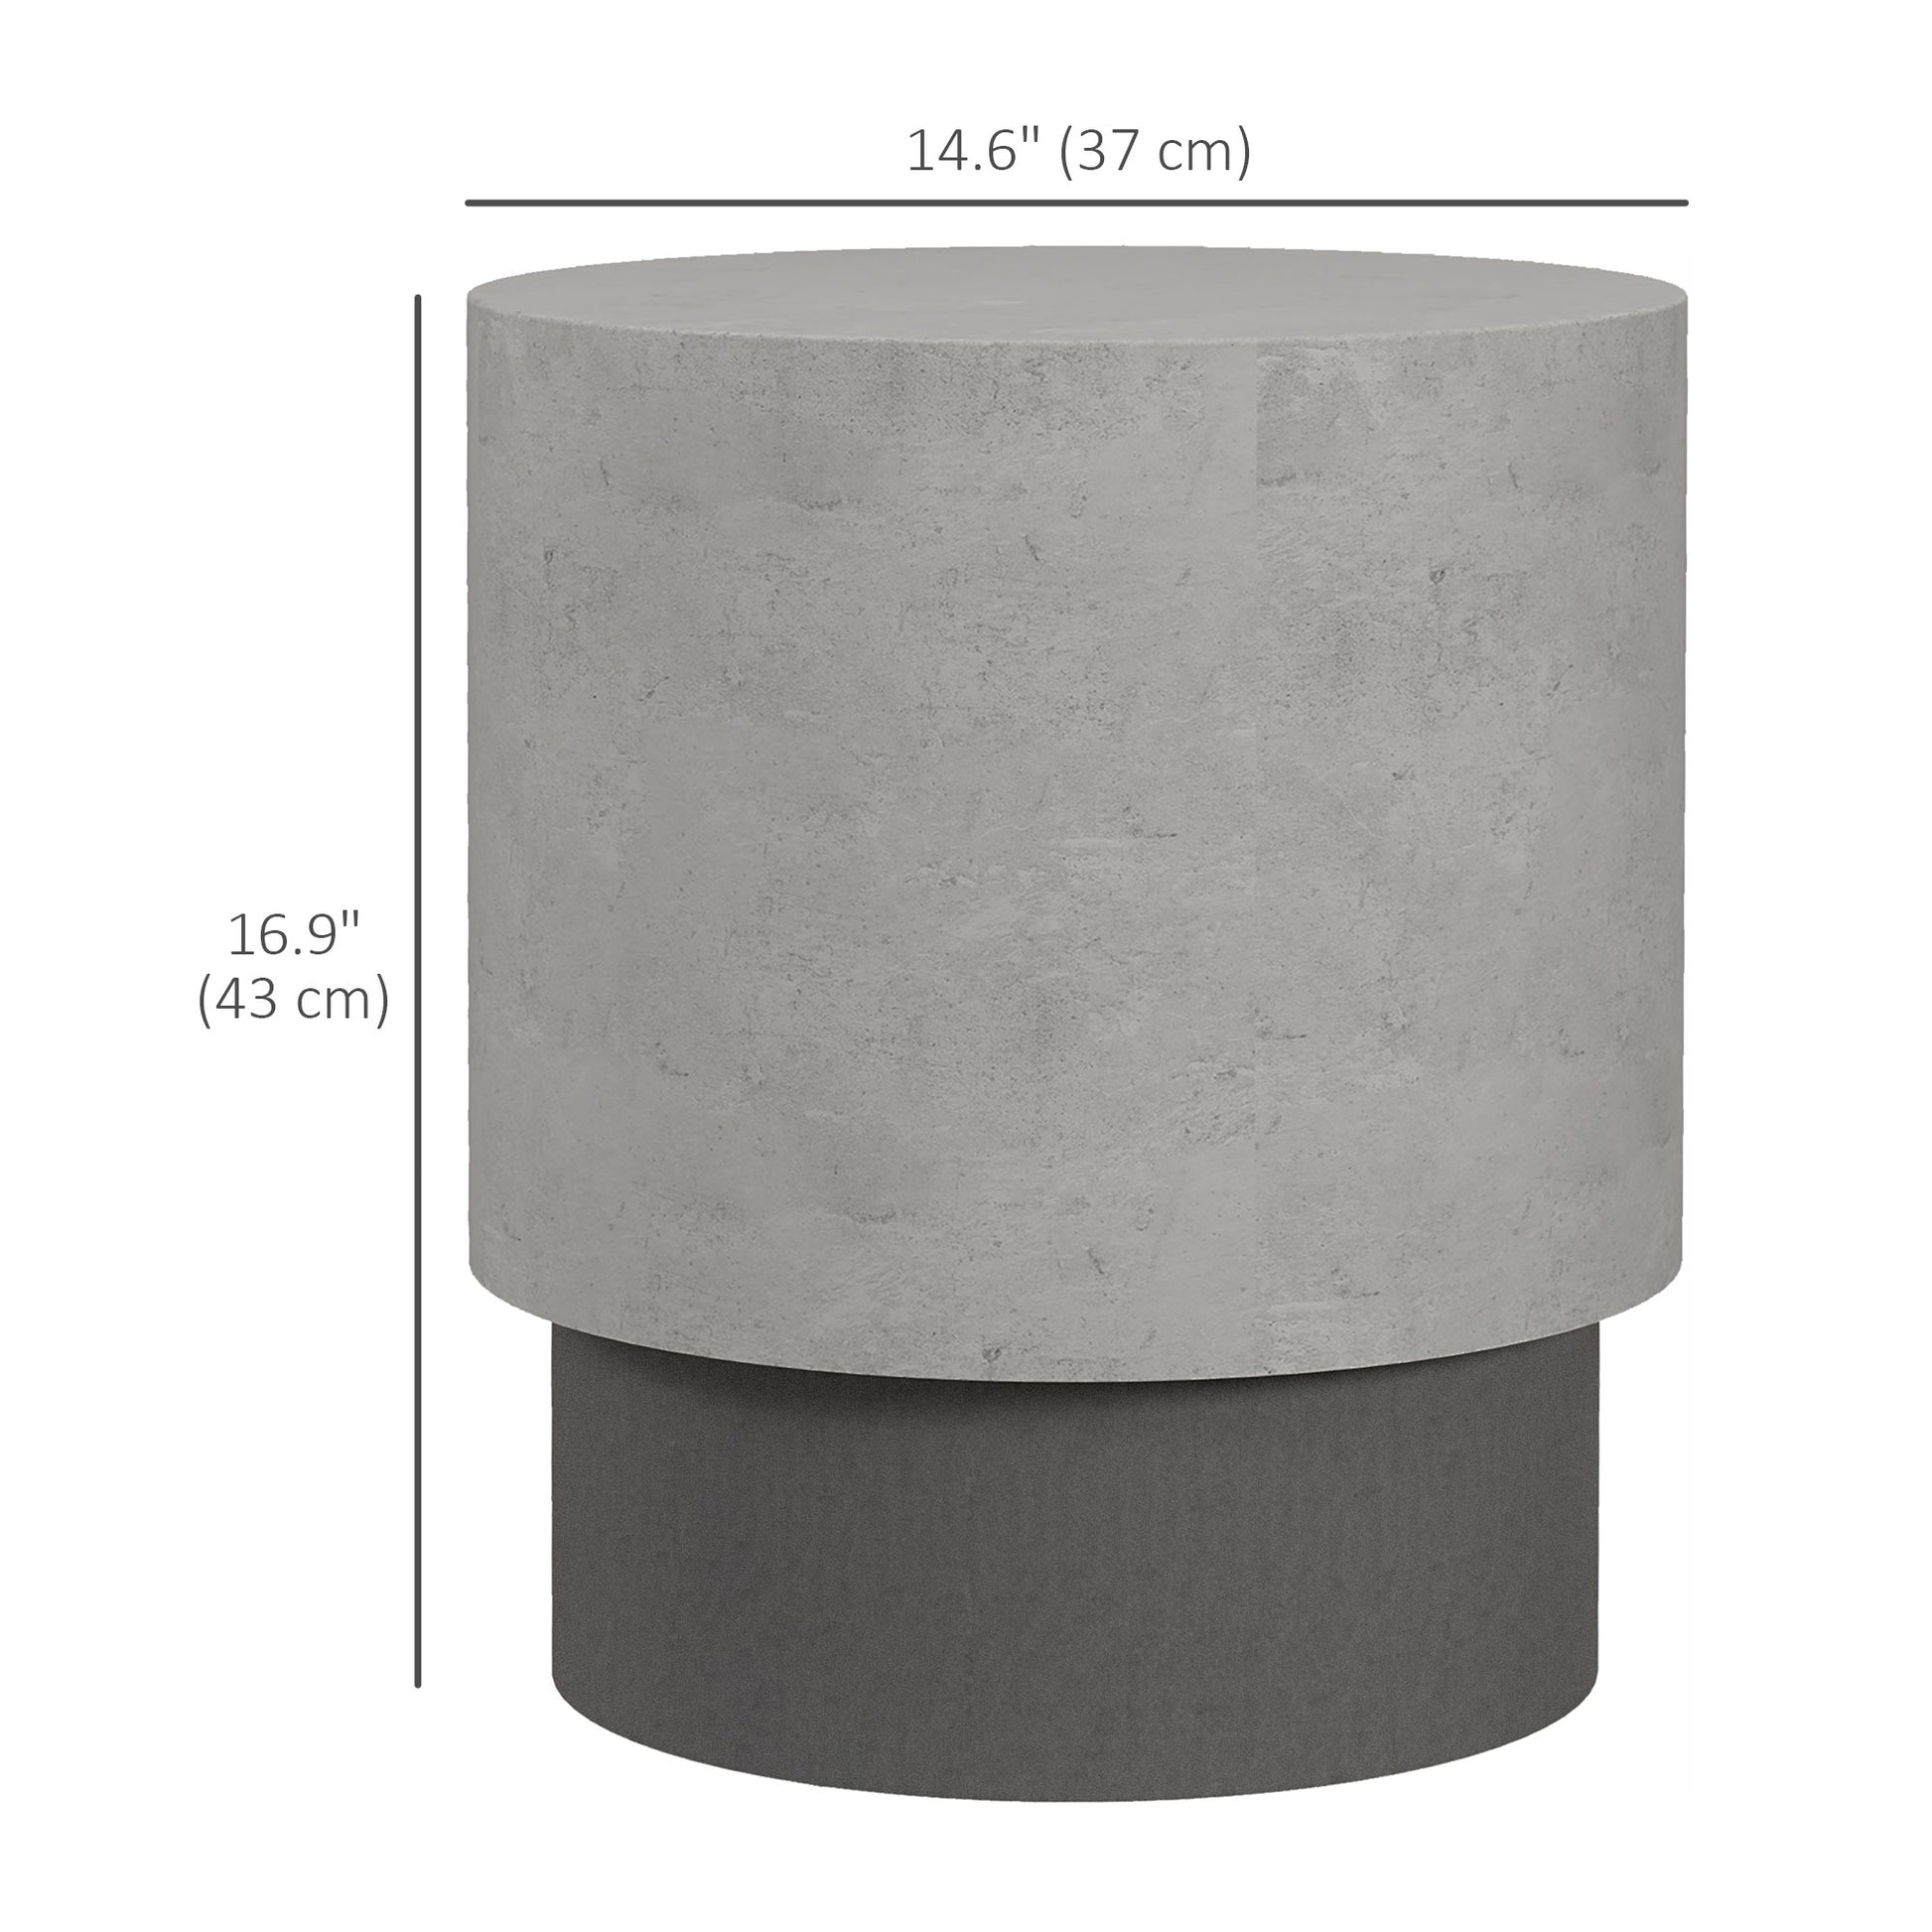 Lightweight Accent Table with Concrete Finish, Round Side Table with 4 Adjustable Feet for Indoor, Outdoor at Gallery Canada